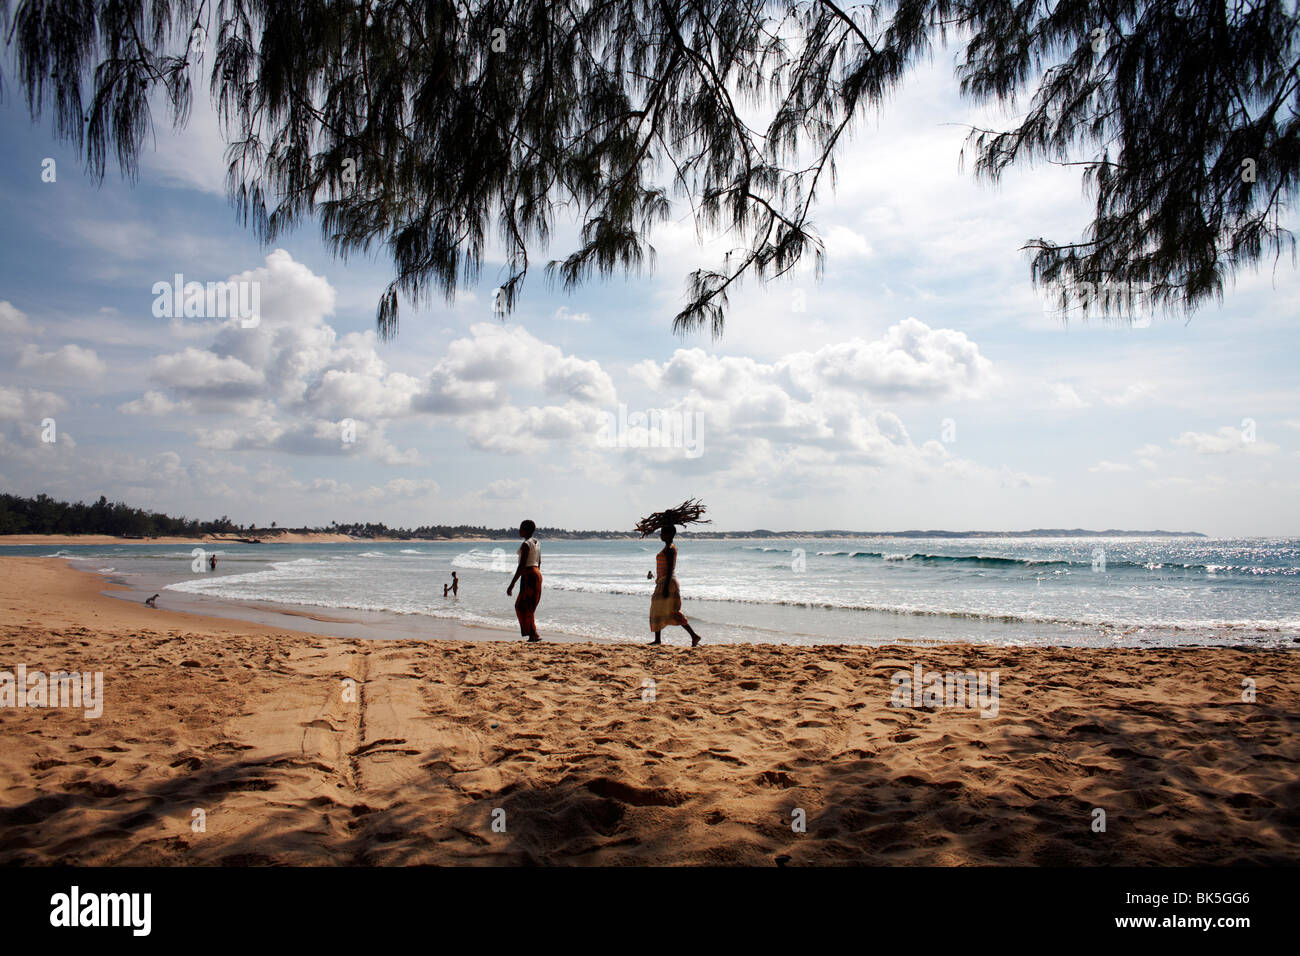 The beach at Tofo on the Indian Ocean, Mozambique, Africa Stock Photo